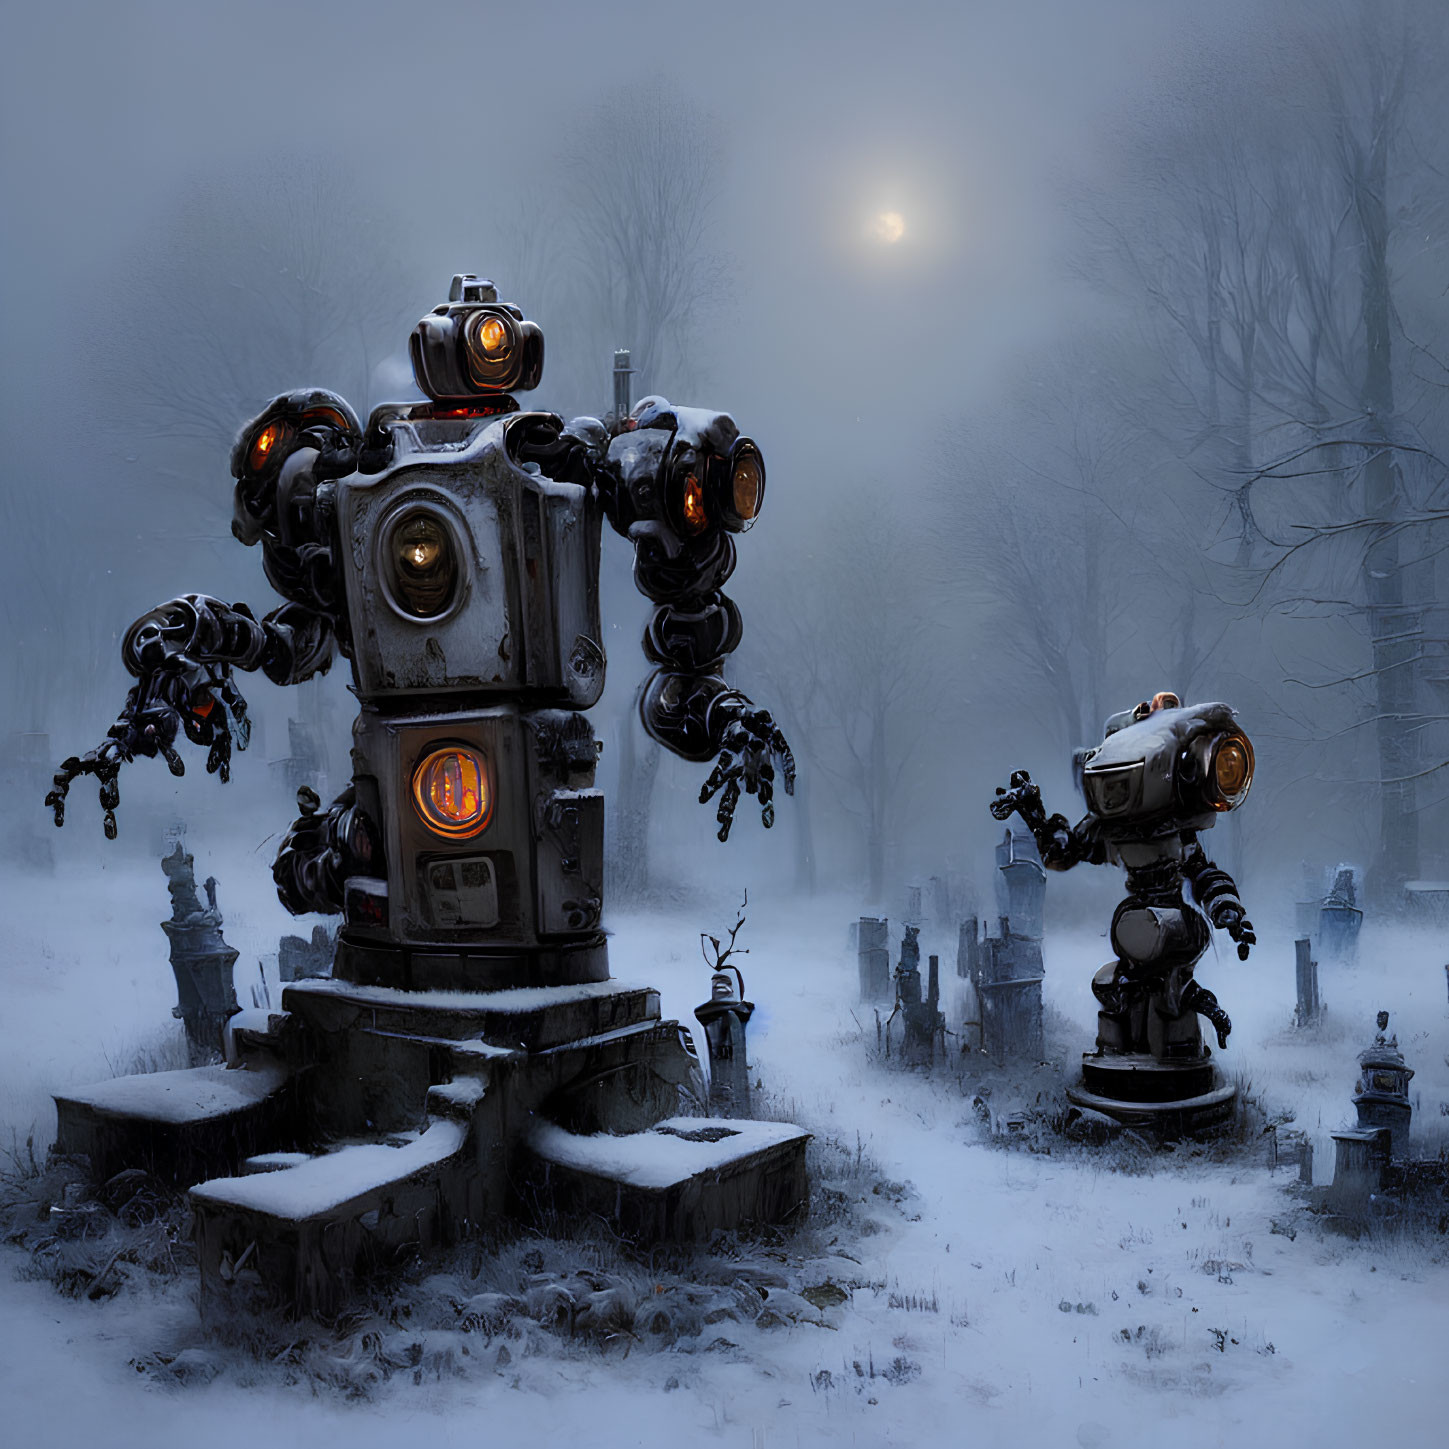 Robots in Moonlit Forest Clearing with Smaller Figures and Gravestones